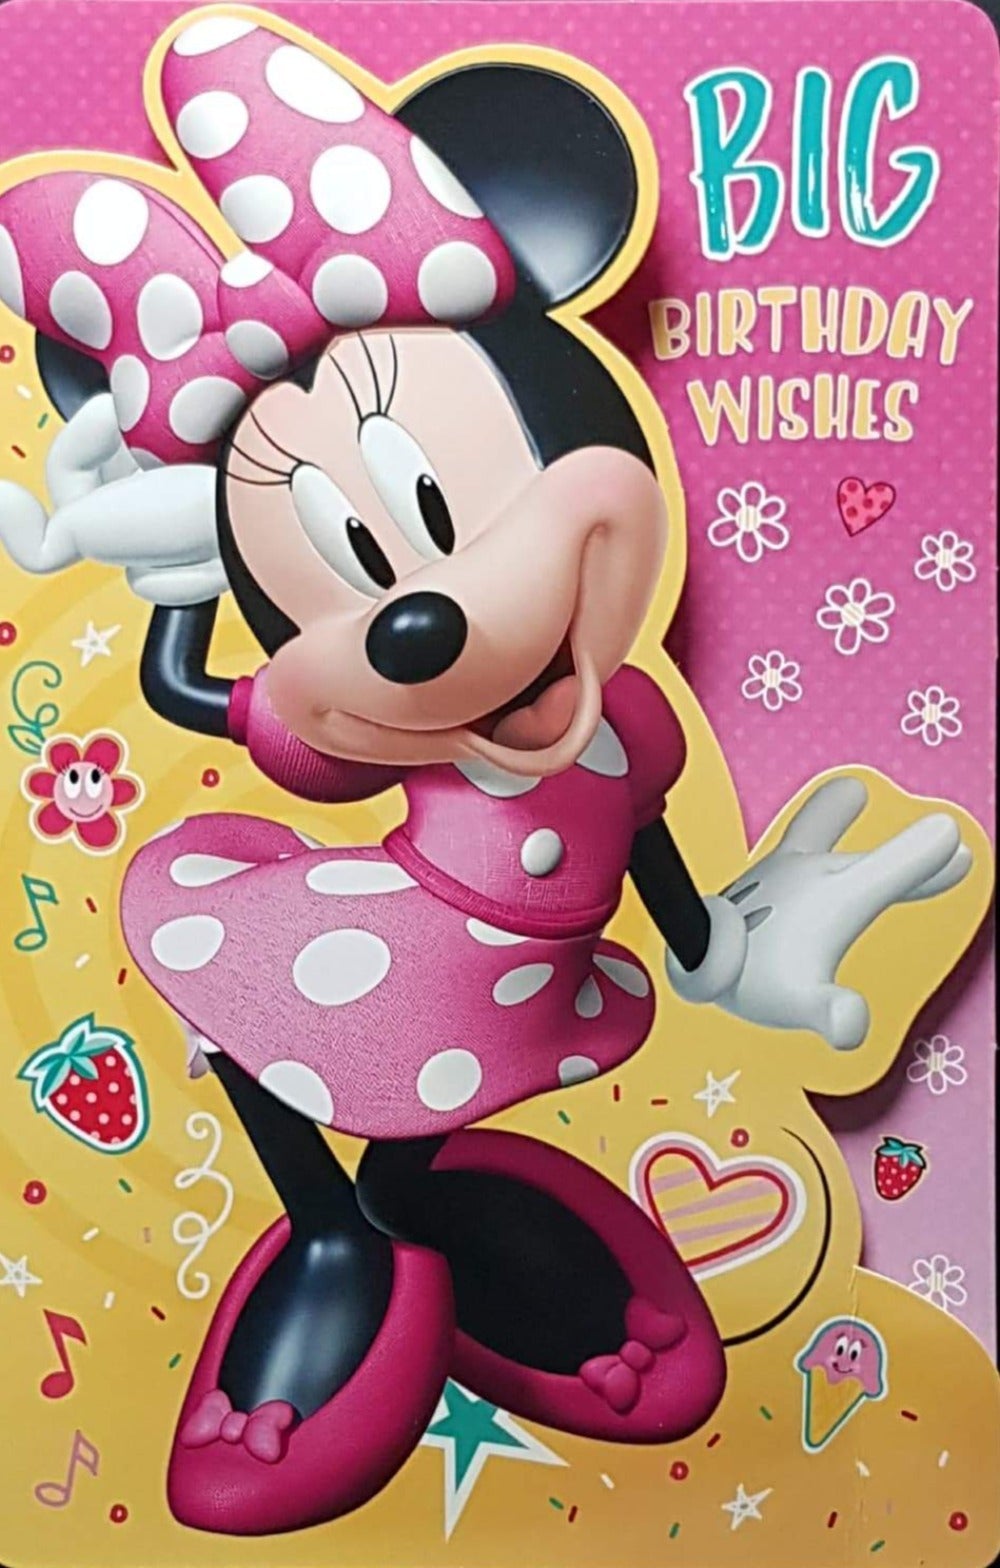 Birthday Card - Girl / A Mouse In A Pink Dress